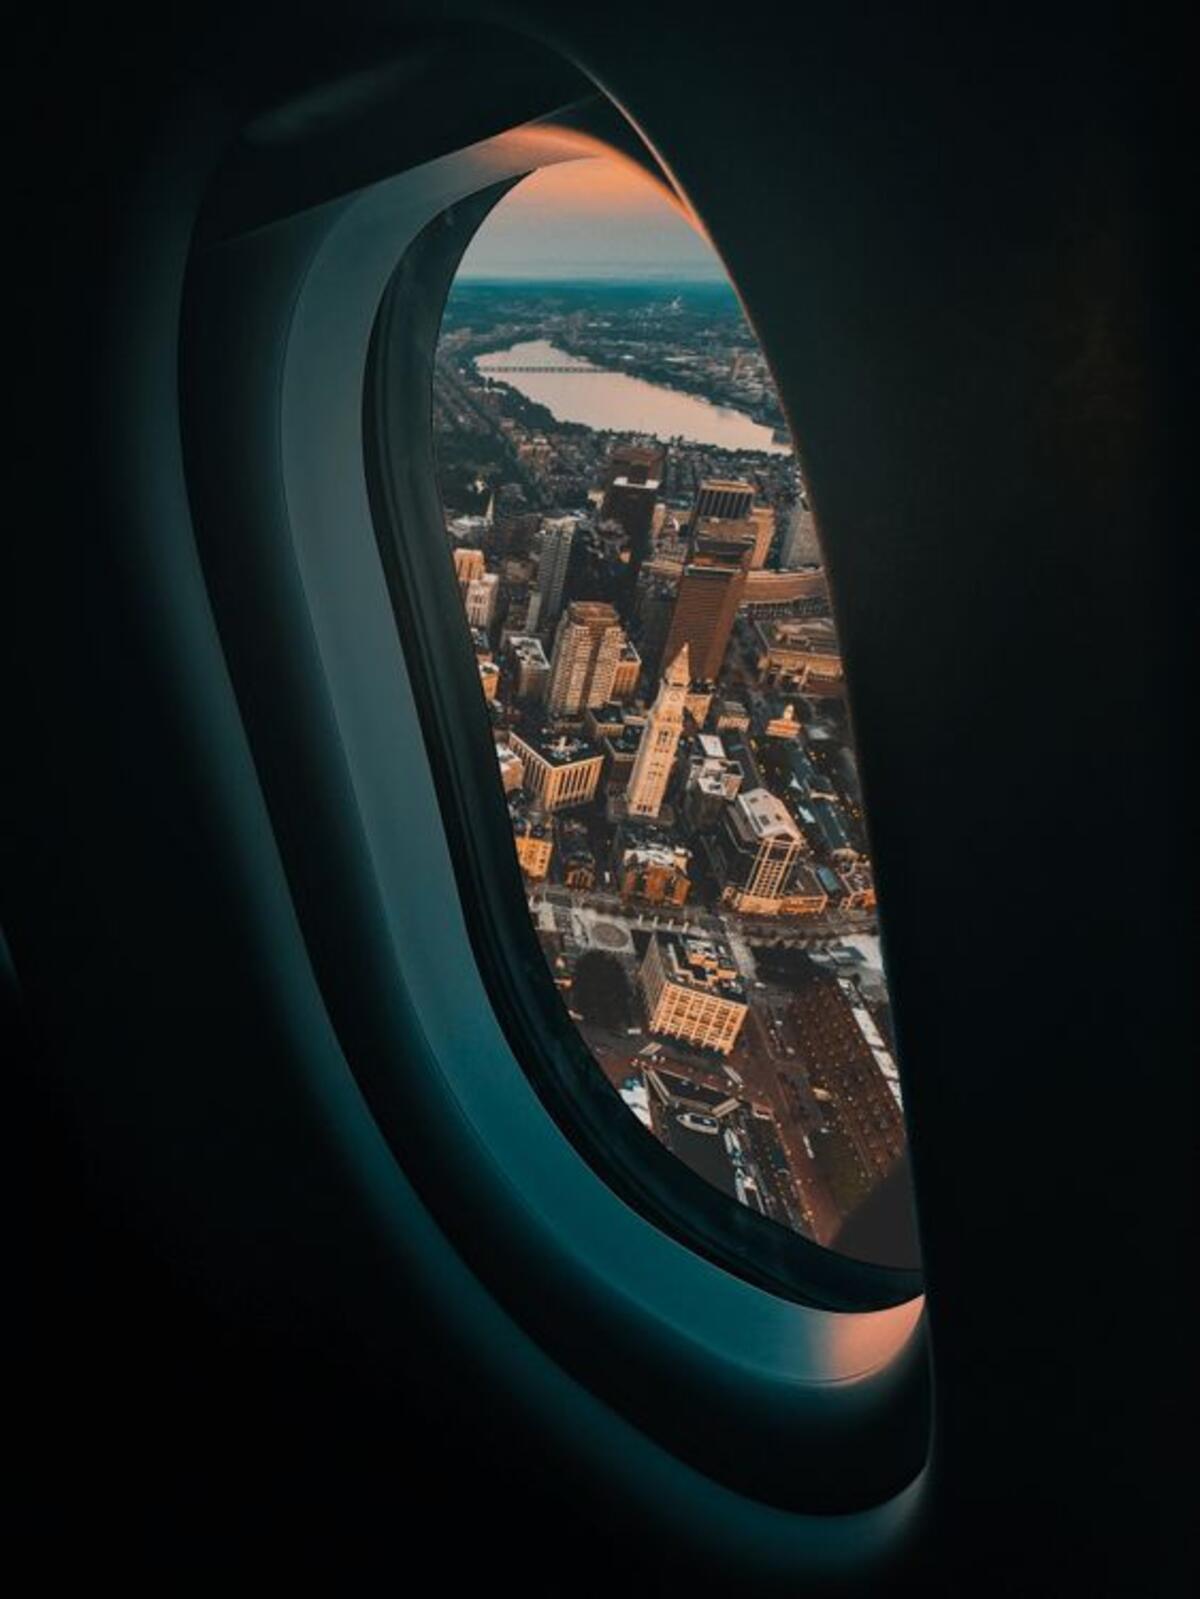 The window on the plane